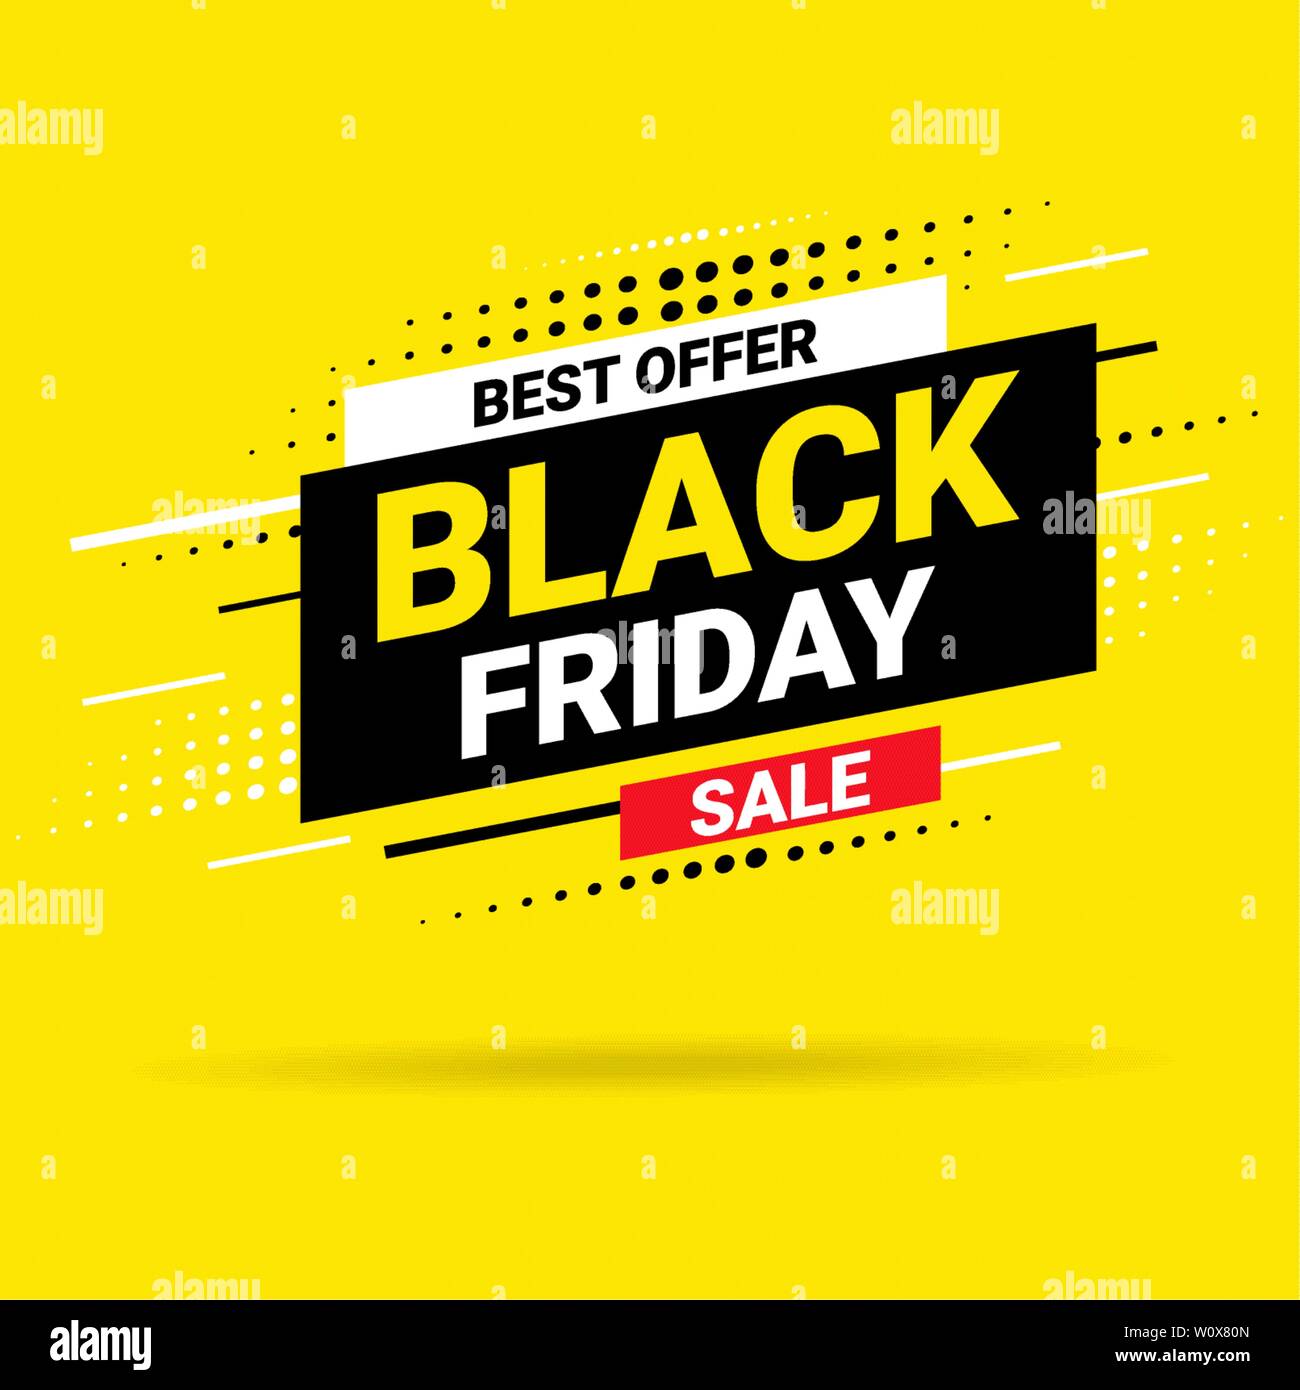 https://c8.alamy.com/comp/W0X80N/black-friday-sale-poster-modern-concept-for-cover-design-shopping-discount-promotion-sale-layout-background-for-business-promotion-and-advertising-vector-illustration-eps-10-W0X80N.jpg